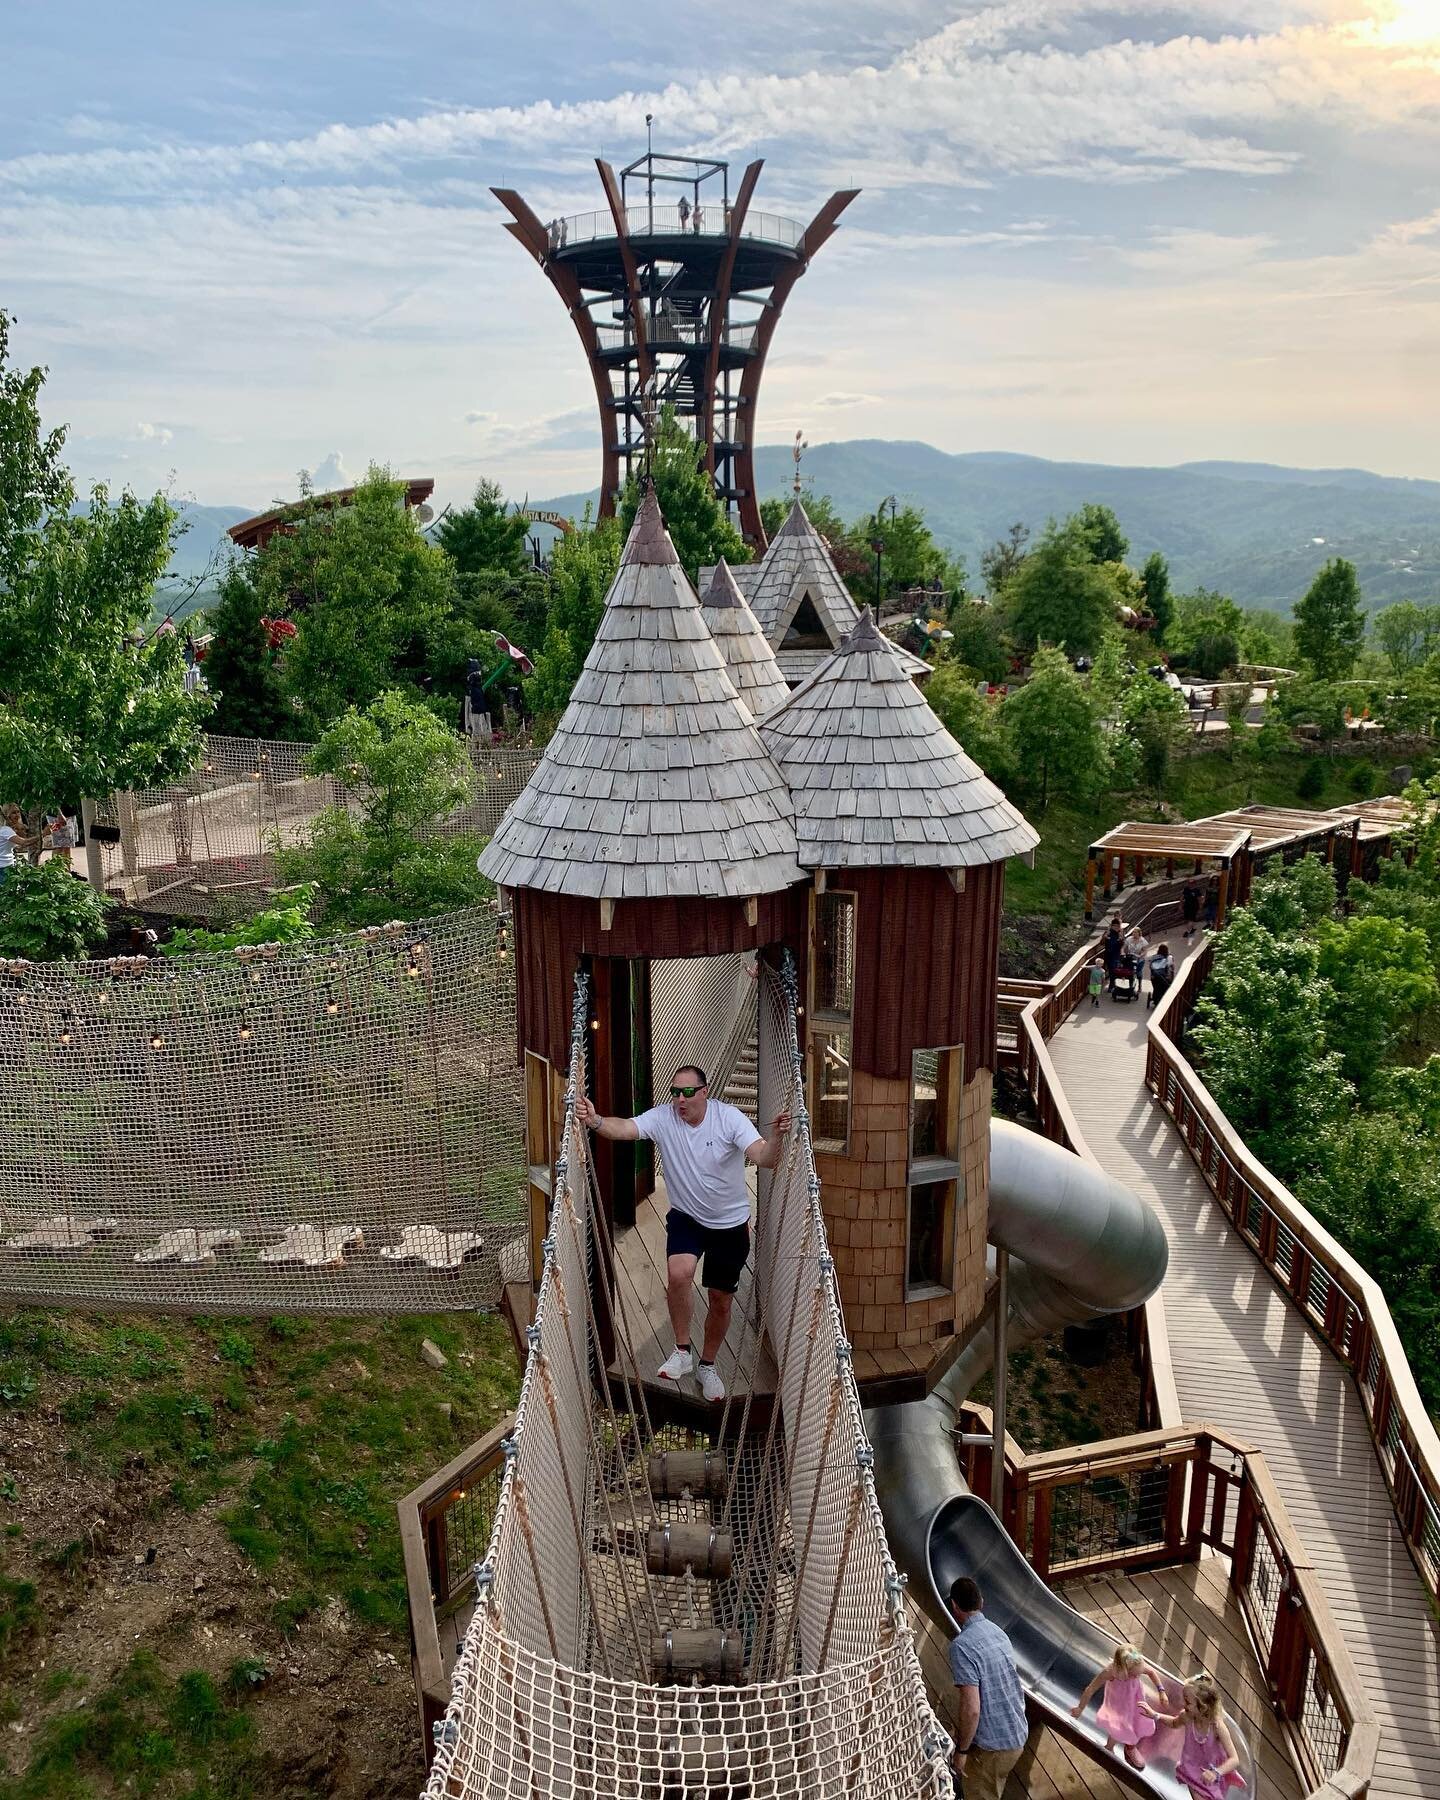 The ever growing fun @anakeesta ! Every time we go up there they have a new attraction. Can&rsquo;t wait to visit this year!
🪵May 2022
.
.
@anakeesta 
#gatlinburg #gatlinburgtennessee #anakeesta #anakeestagatlinburg #smokymountains #bigtandvitaminbr